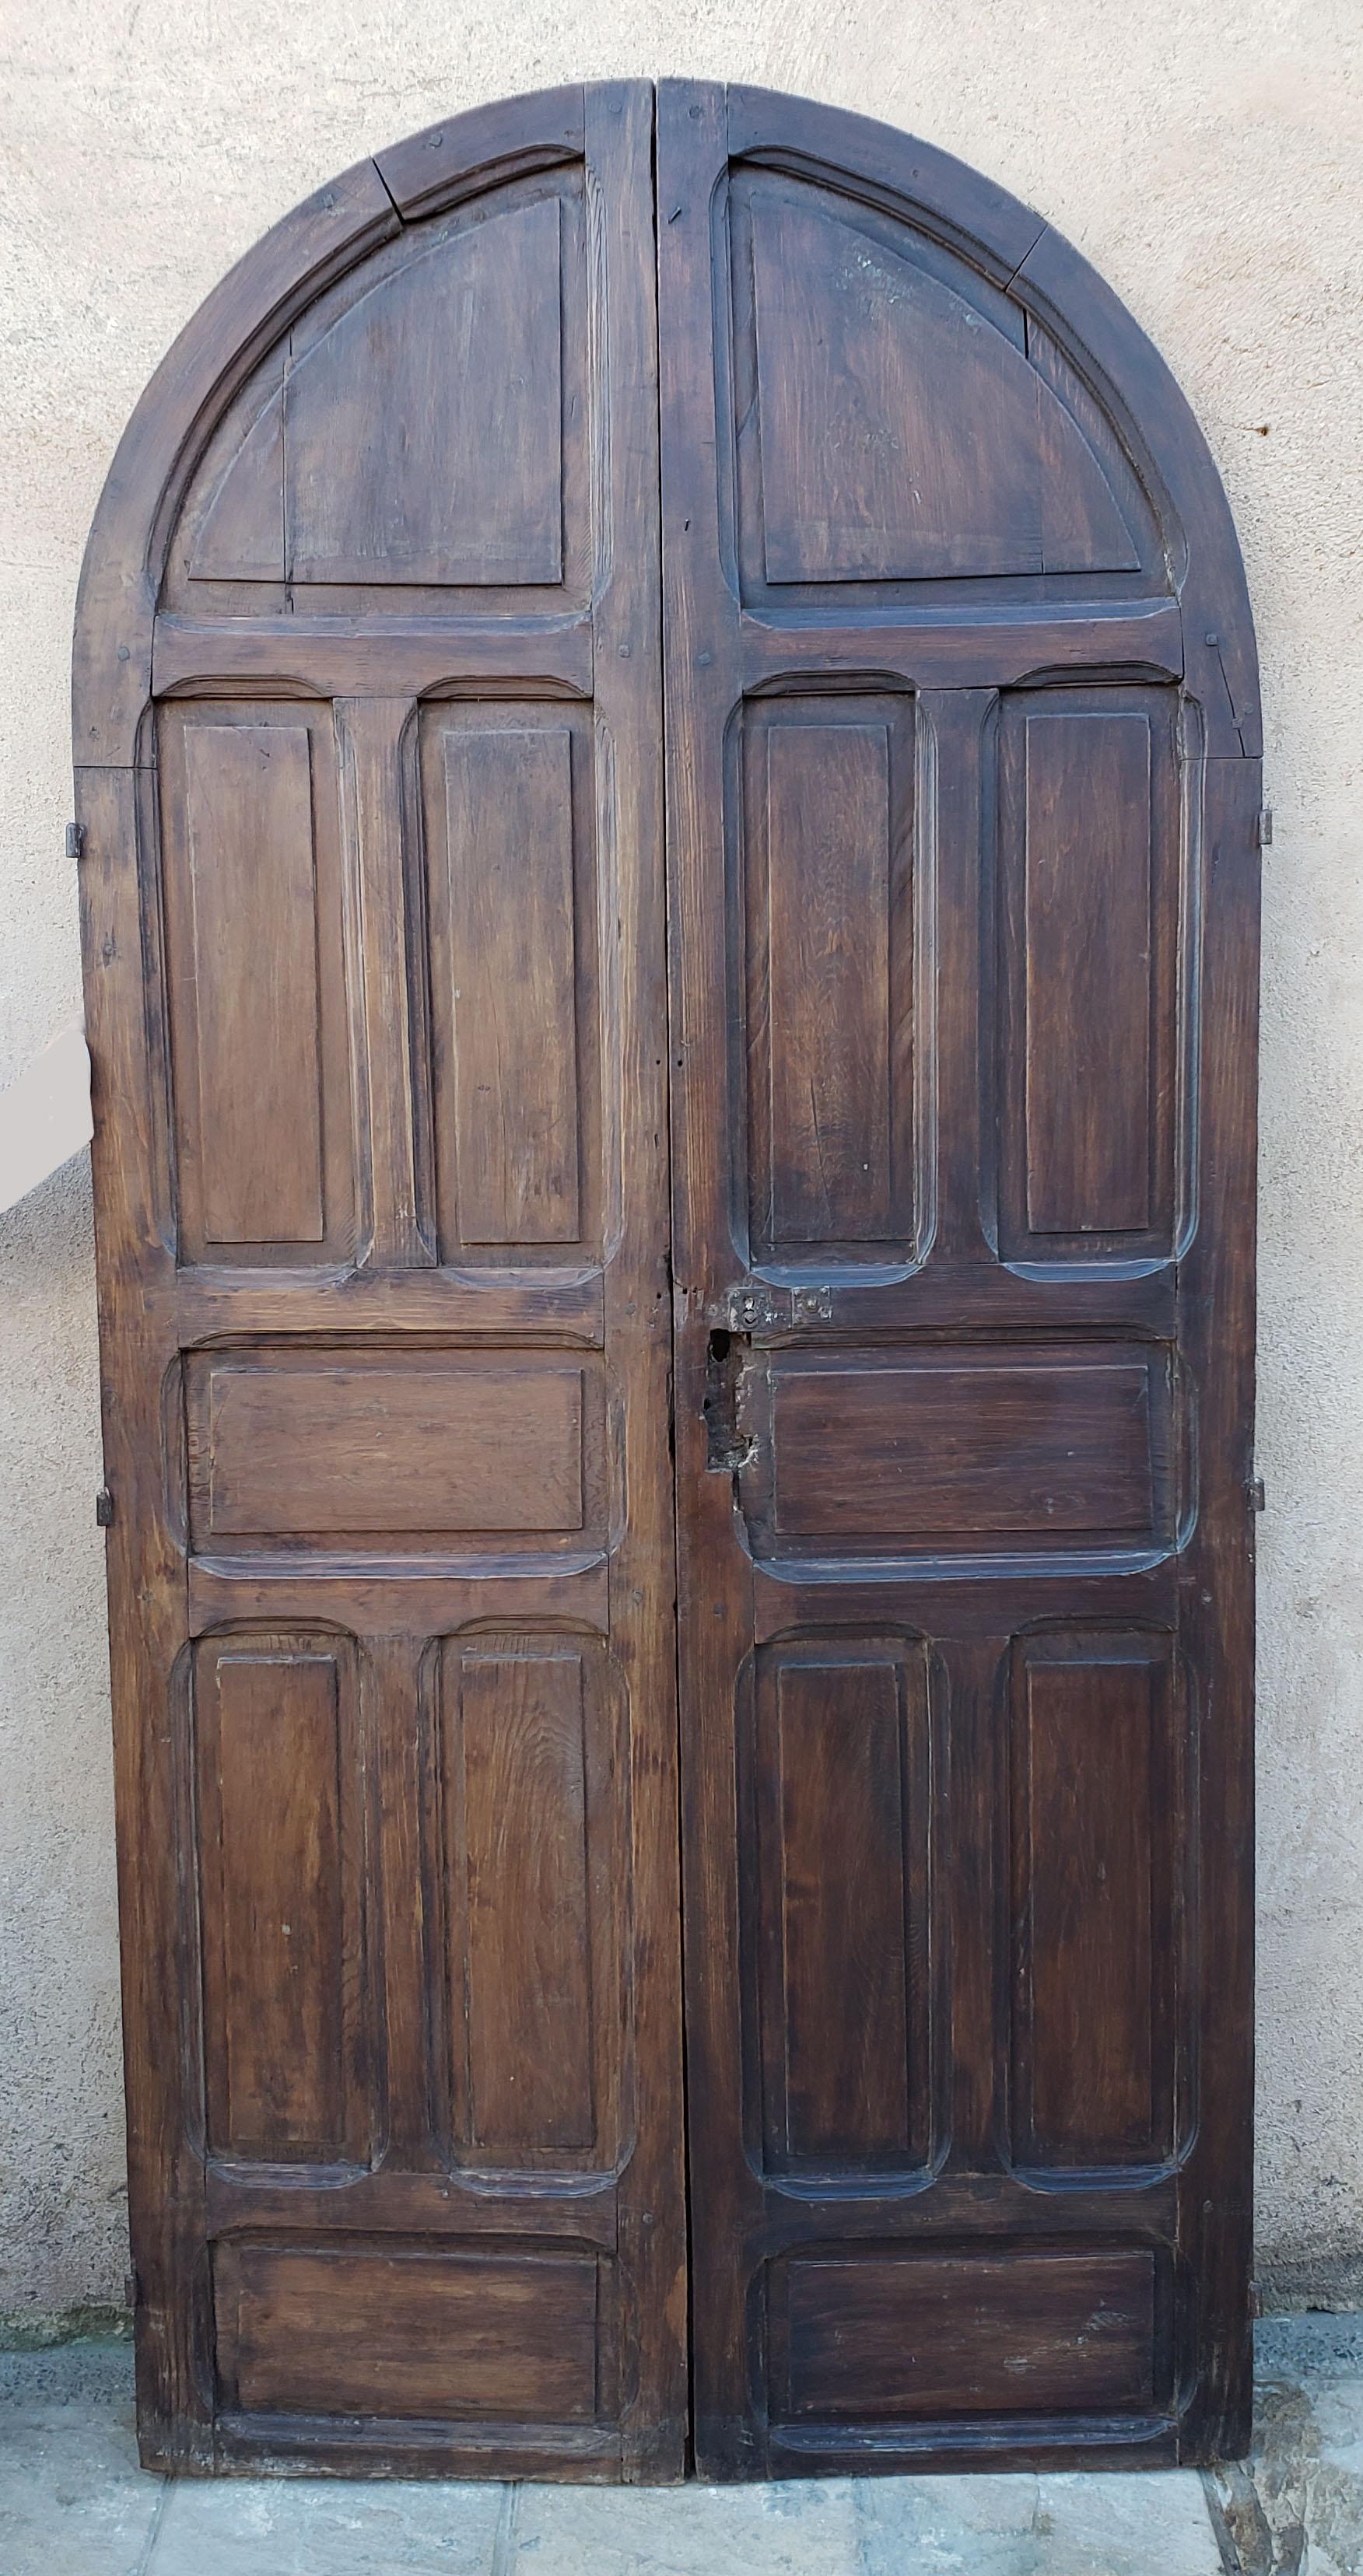 Another amazing double panel Moroccan door measuring approximately 88